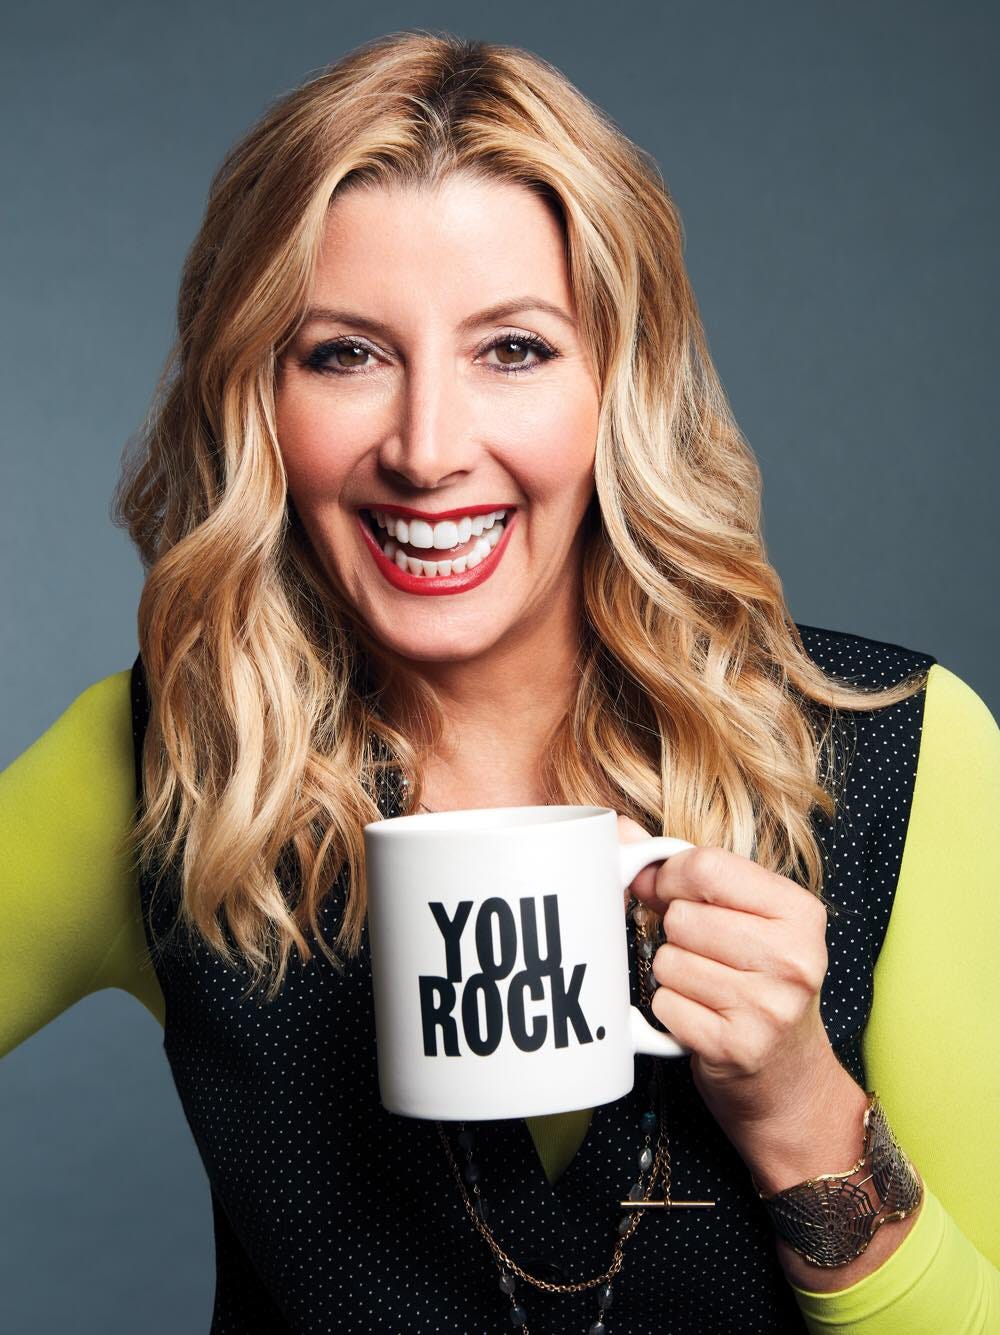 Spanx Founder Sara Blakely Has the Relationship Advice You Need to